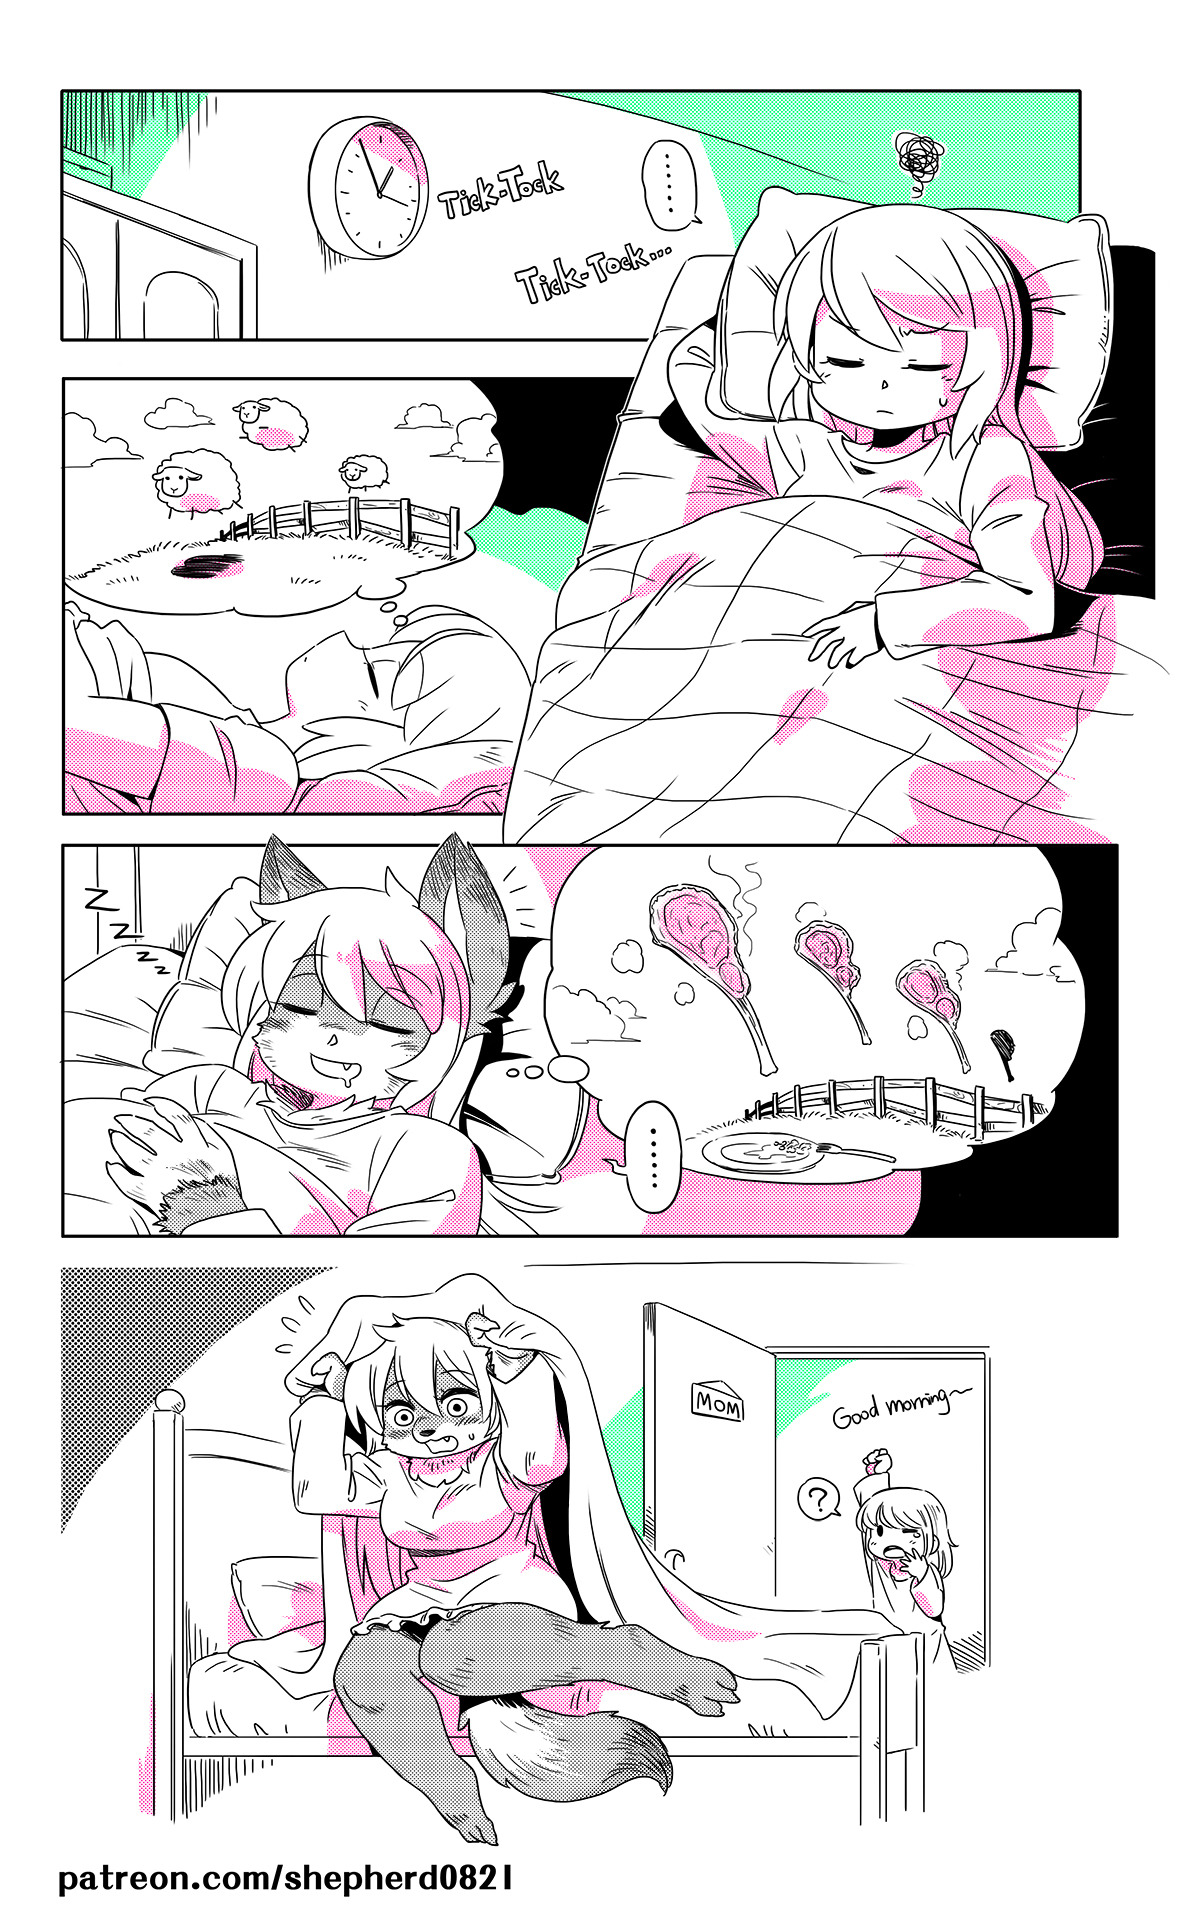  Modern MoGal # 18 - Count sheep  ／／／／／／／／／／Supporting me for